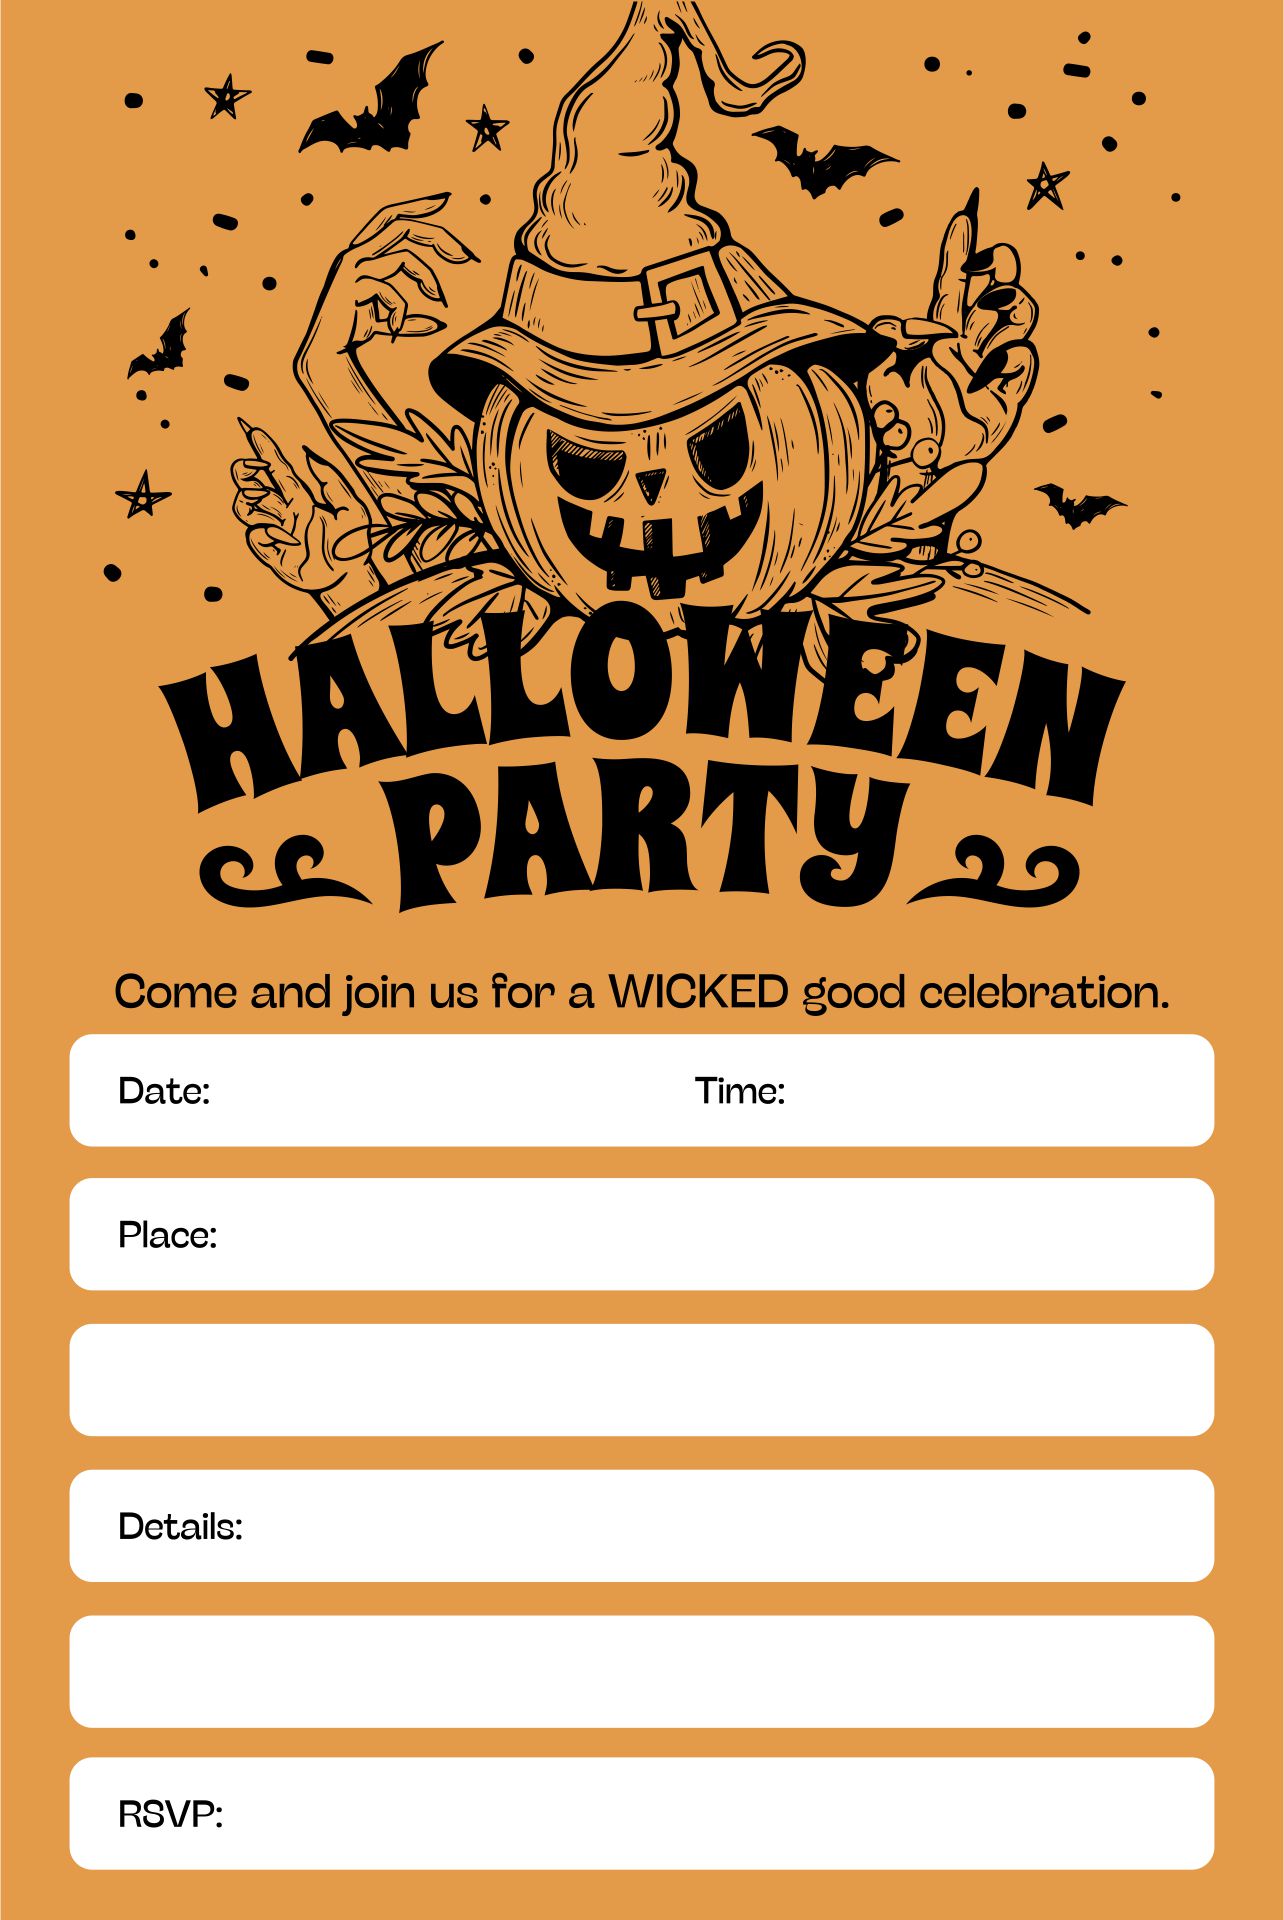 6 Best Images of Adult Halloween Party Invitations Printable - Free ...